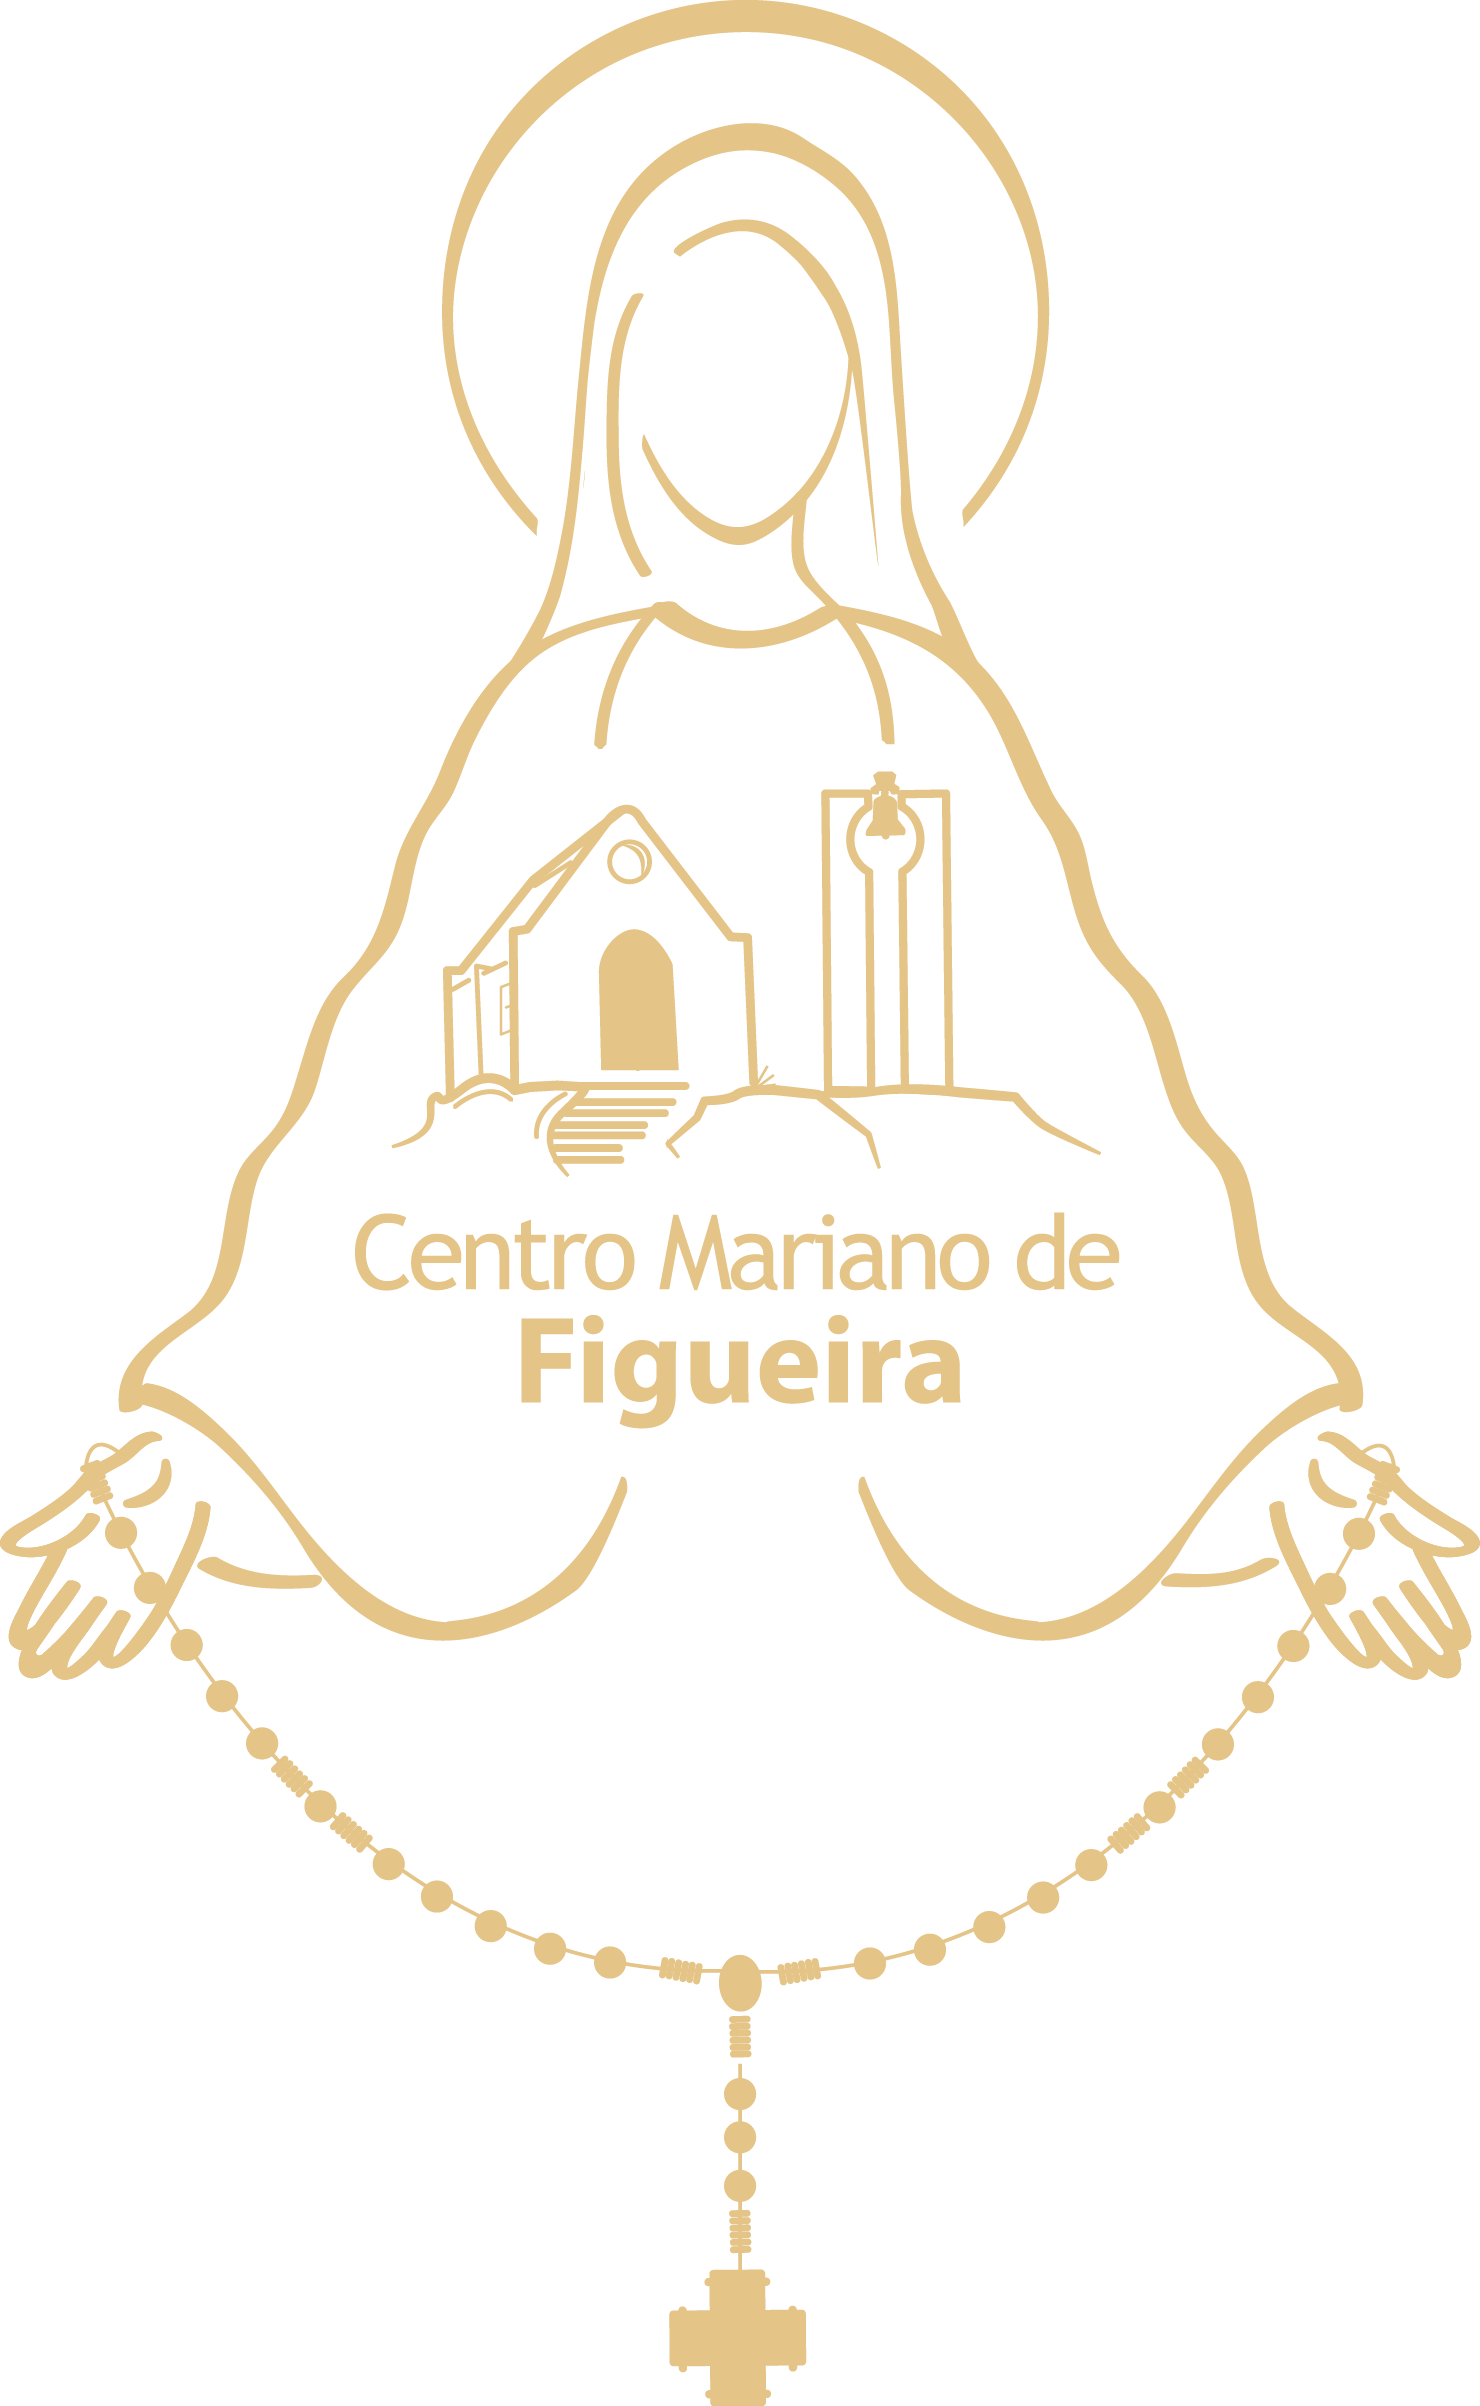 Figueira